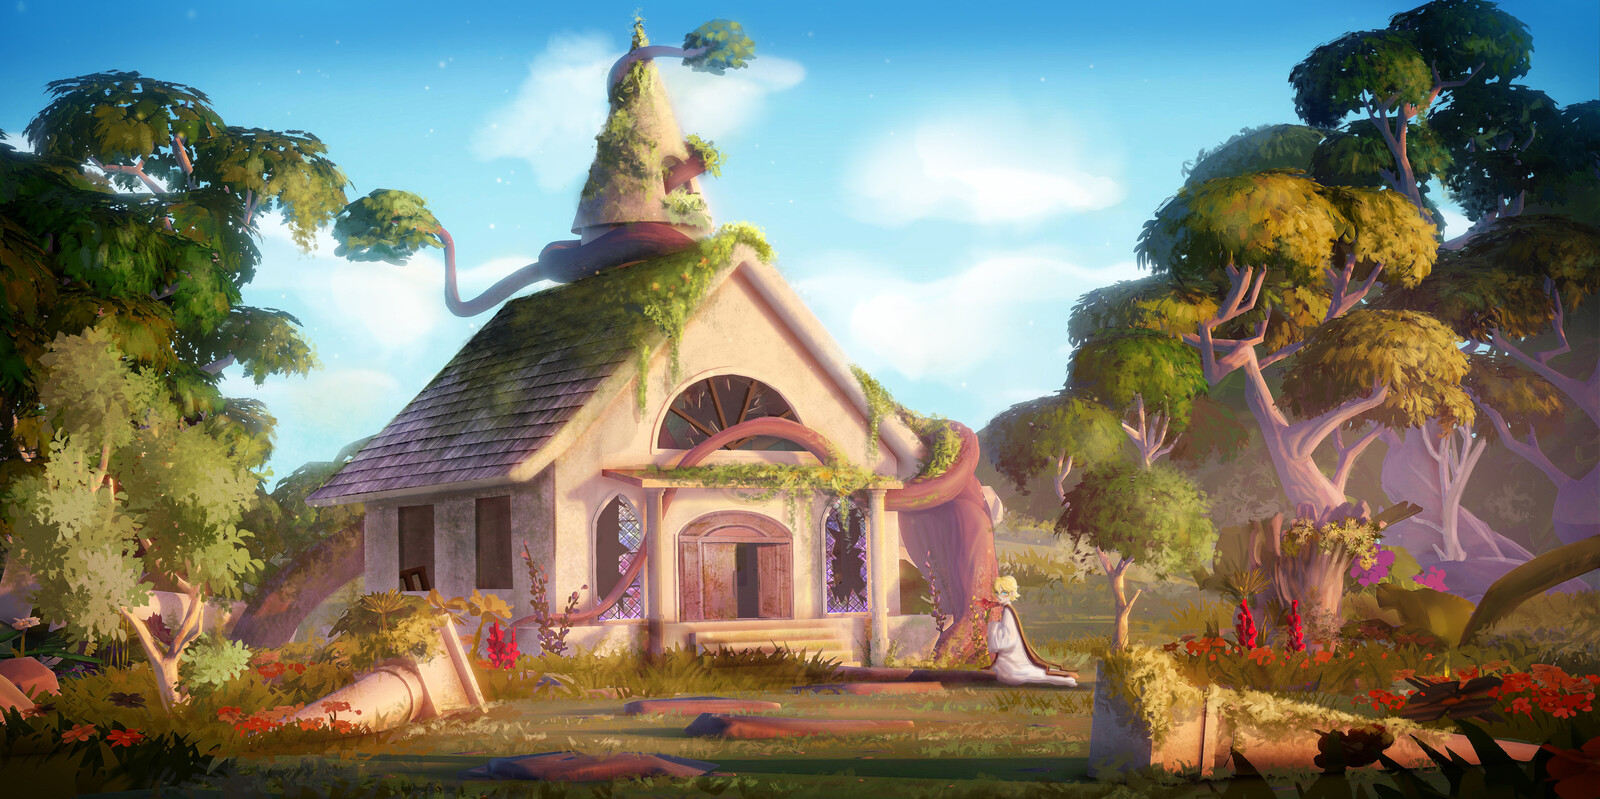 “Layla” Environment Design part----Outside the Temple